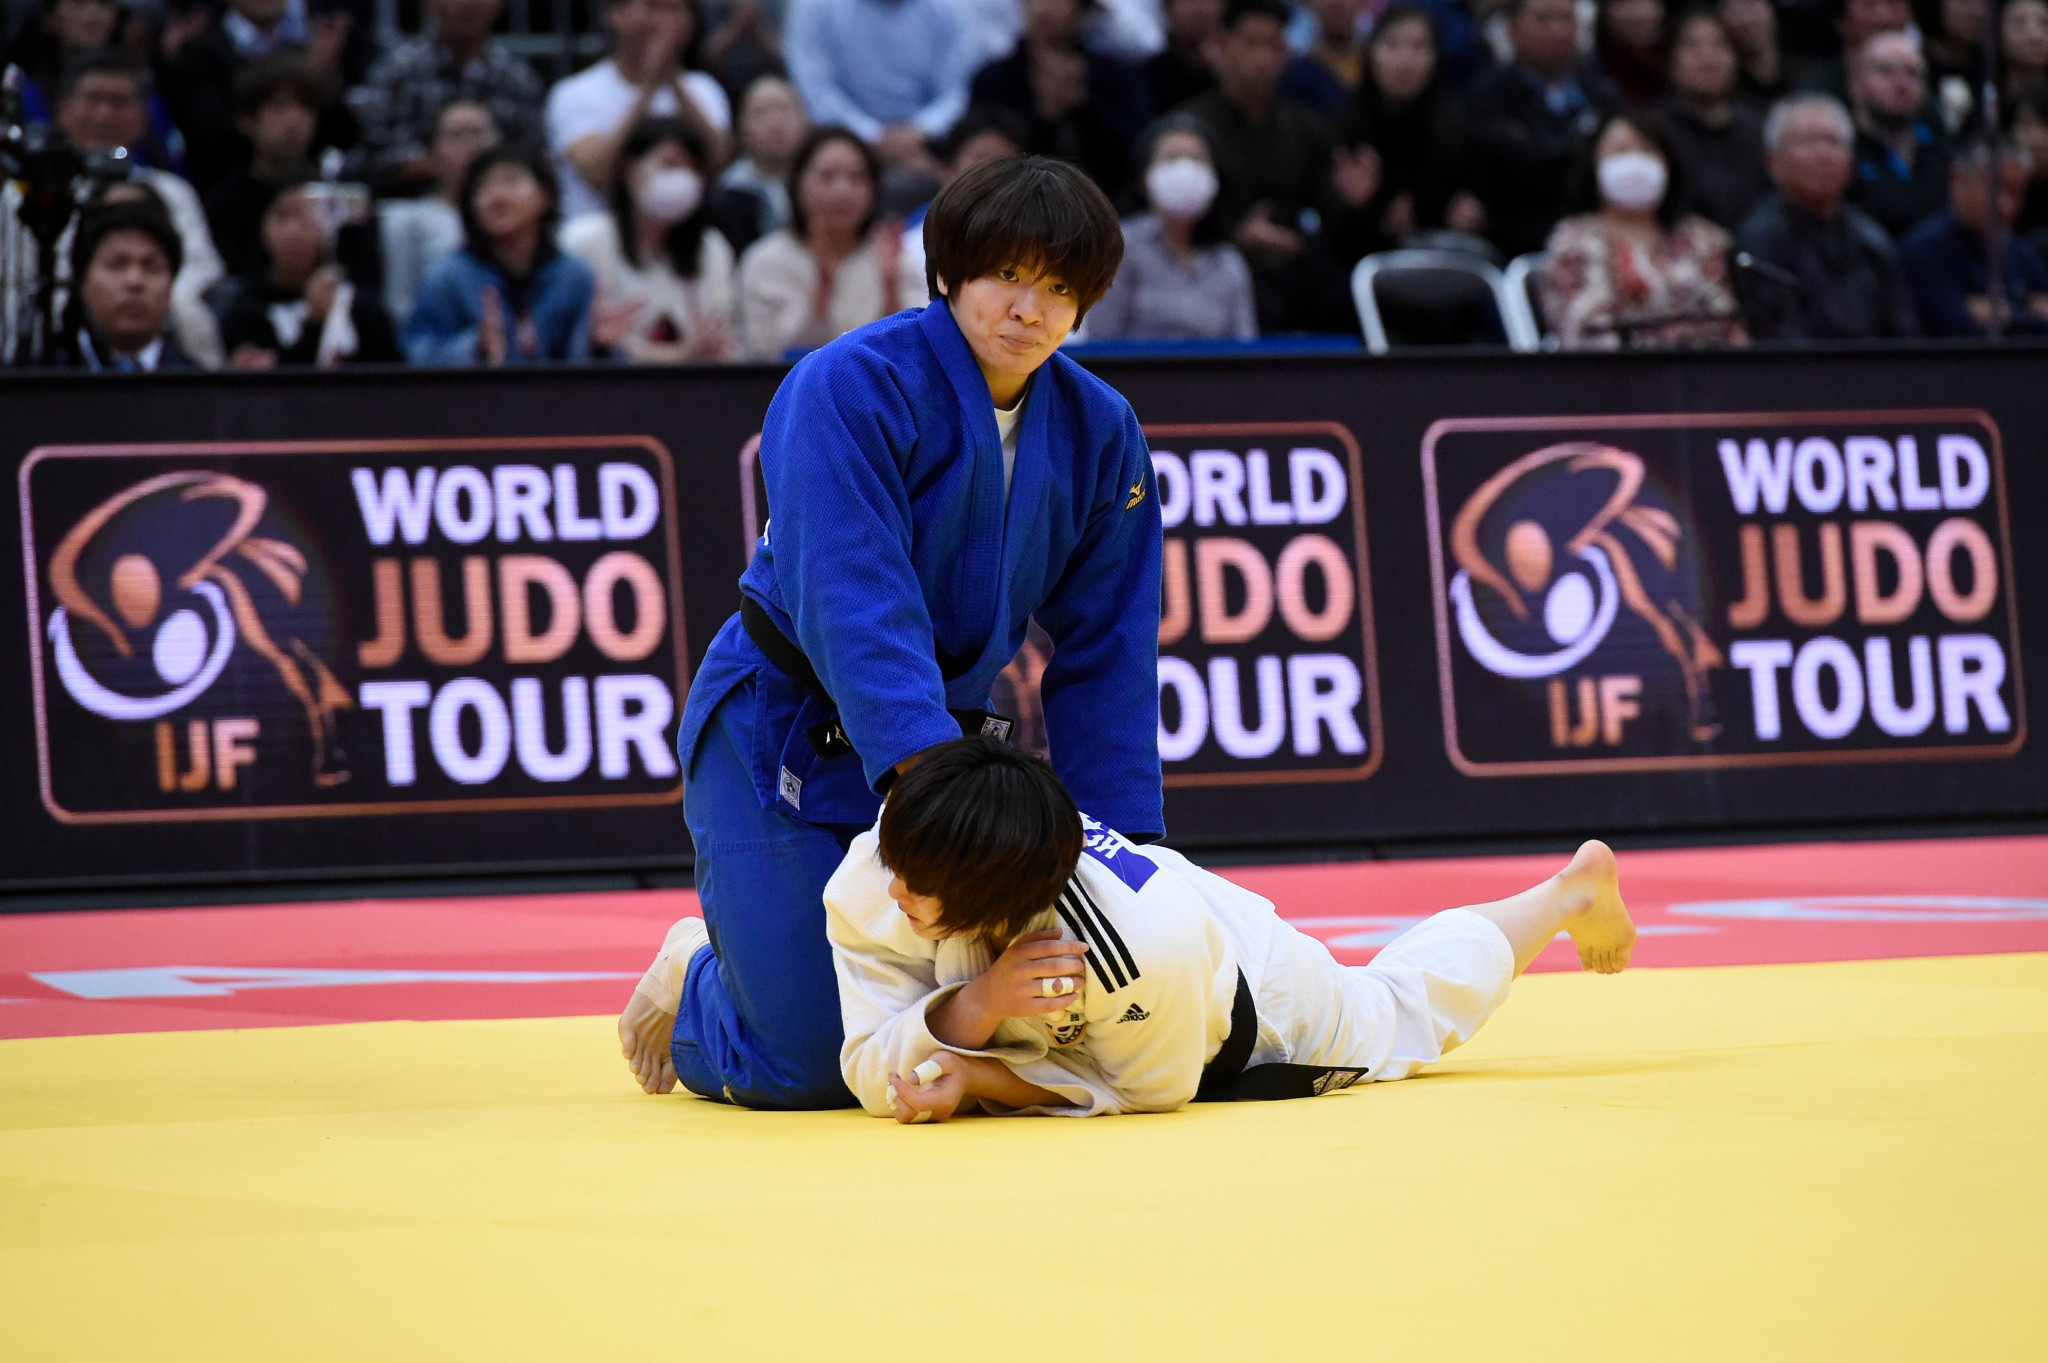 Japan has so far nominated 13 judokas for the Olympics but could reopen the process ©Getty Images